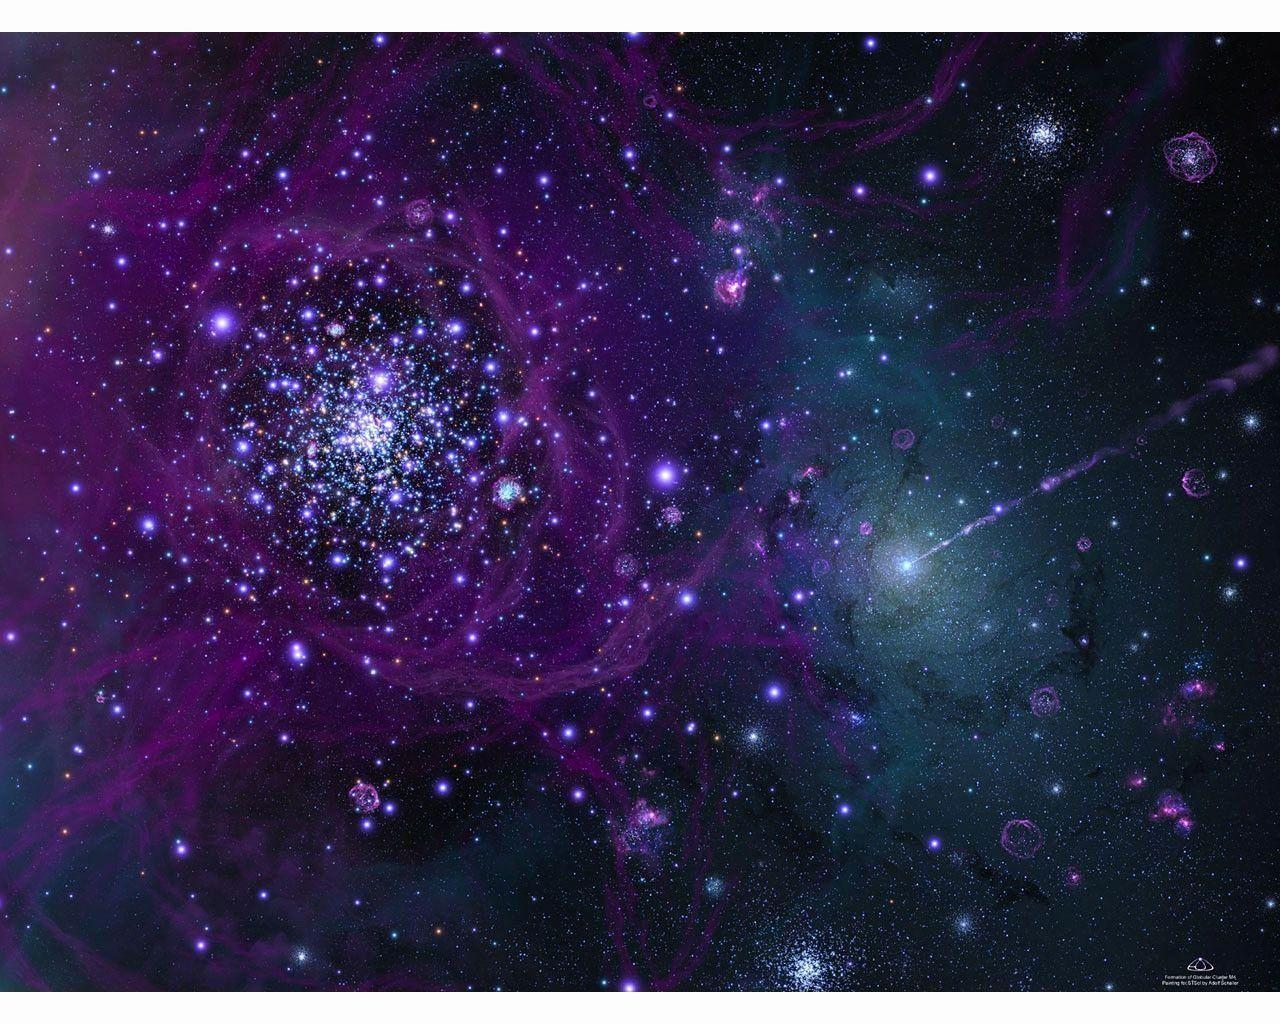 Roblox Galaxy Wallpapers Top Free Roblox Galaxy Backgrounds Wallpaperaccess - dominus background background galaxy cool roblox wallpaper